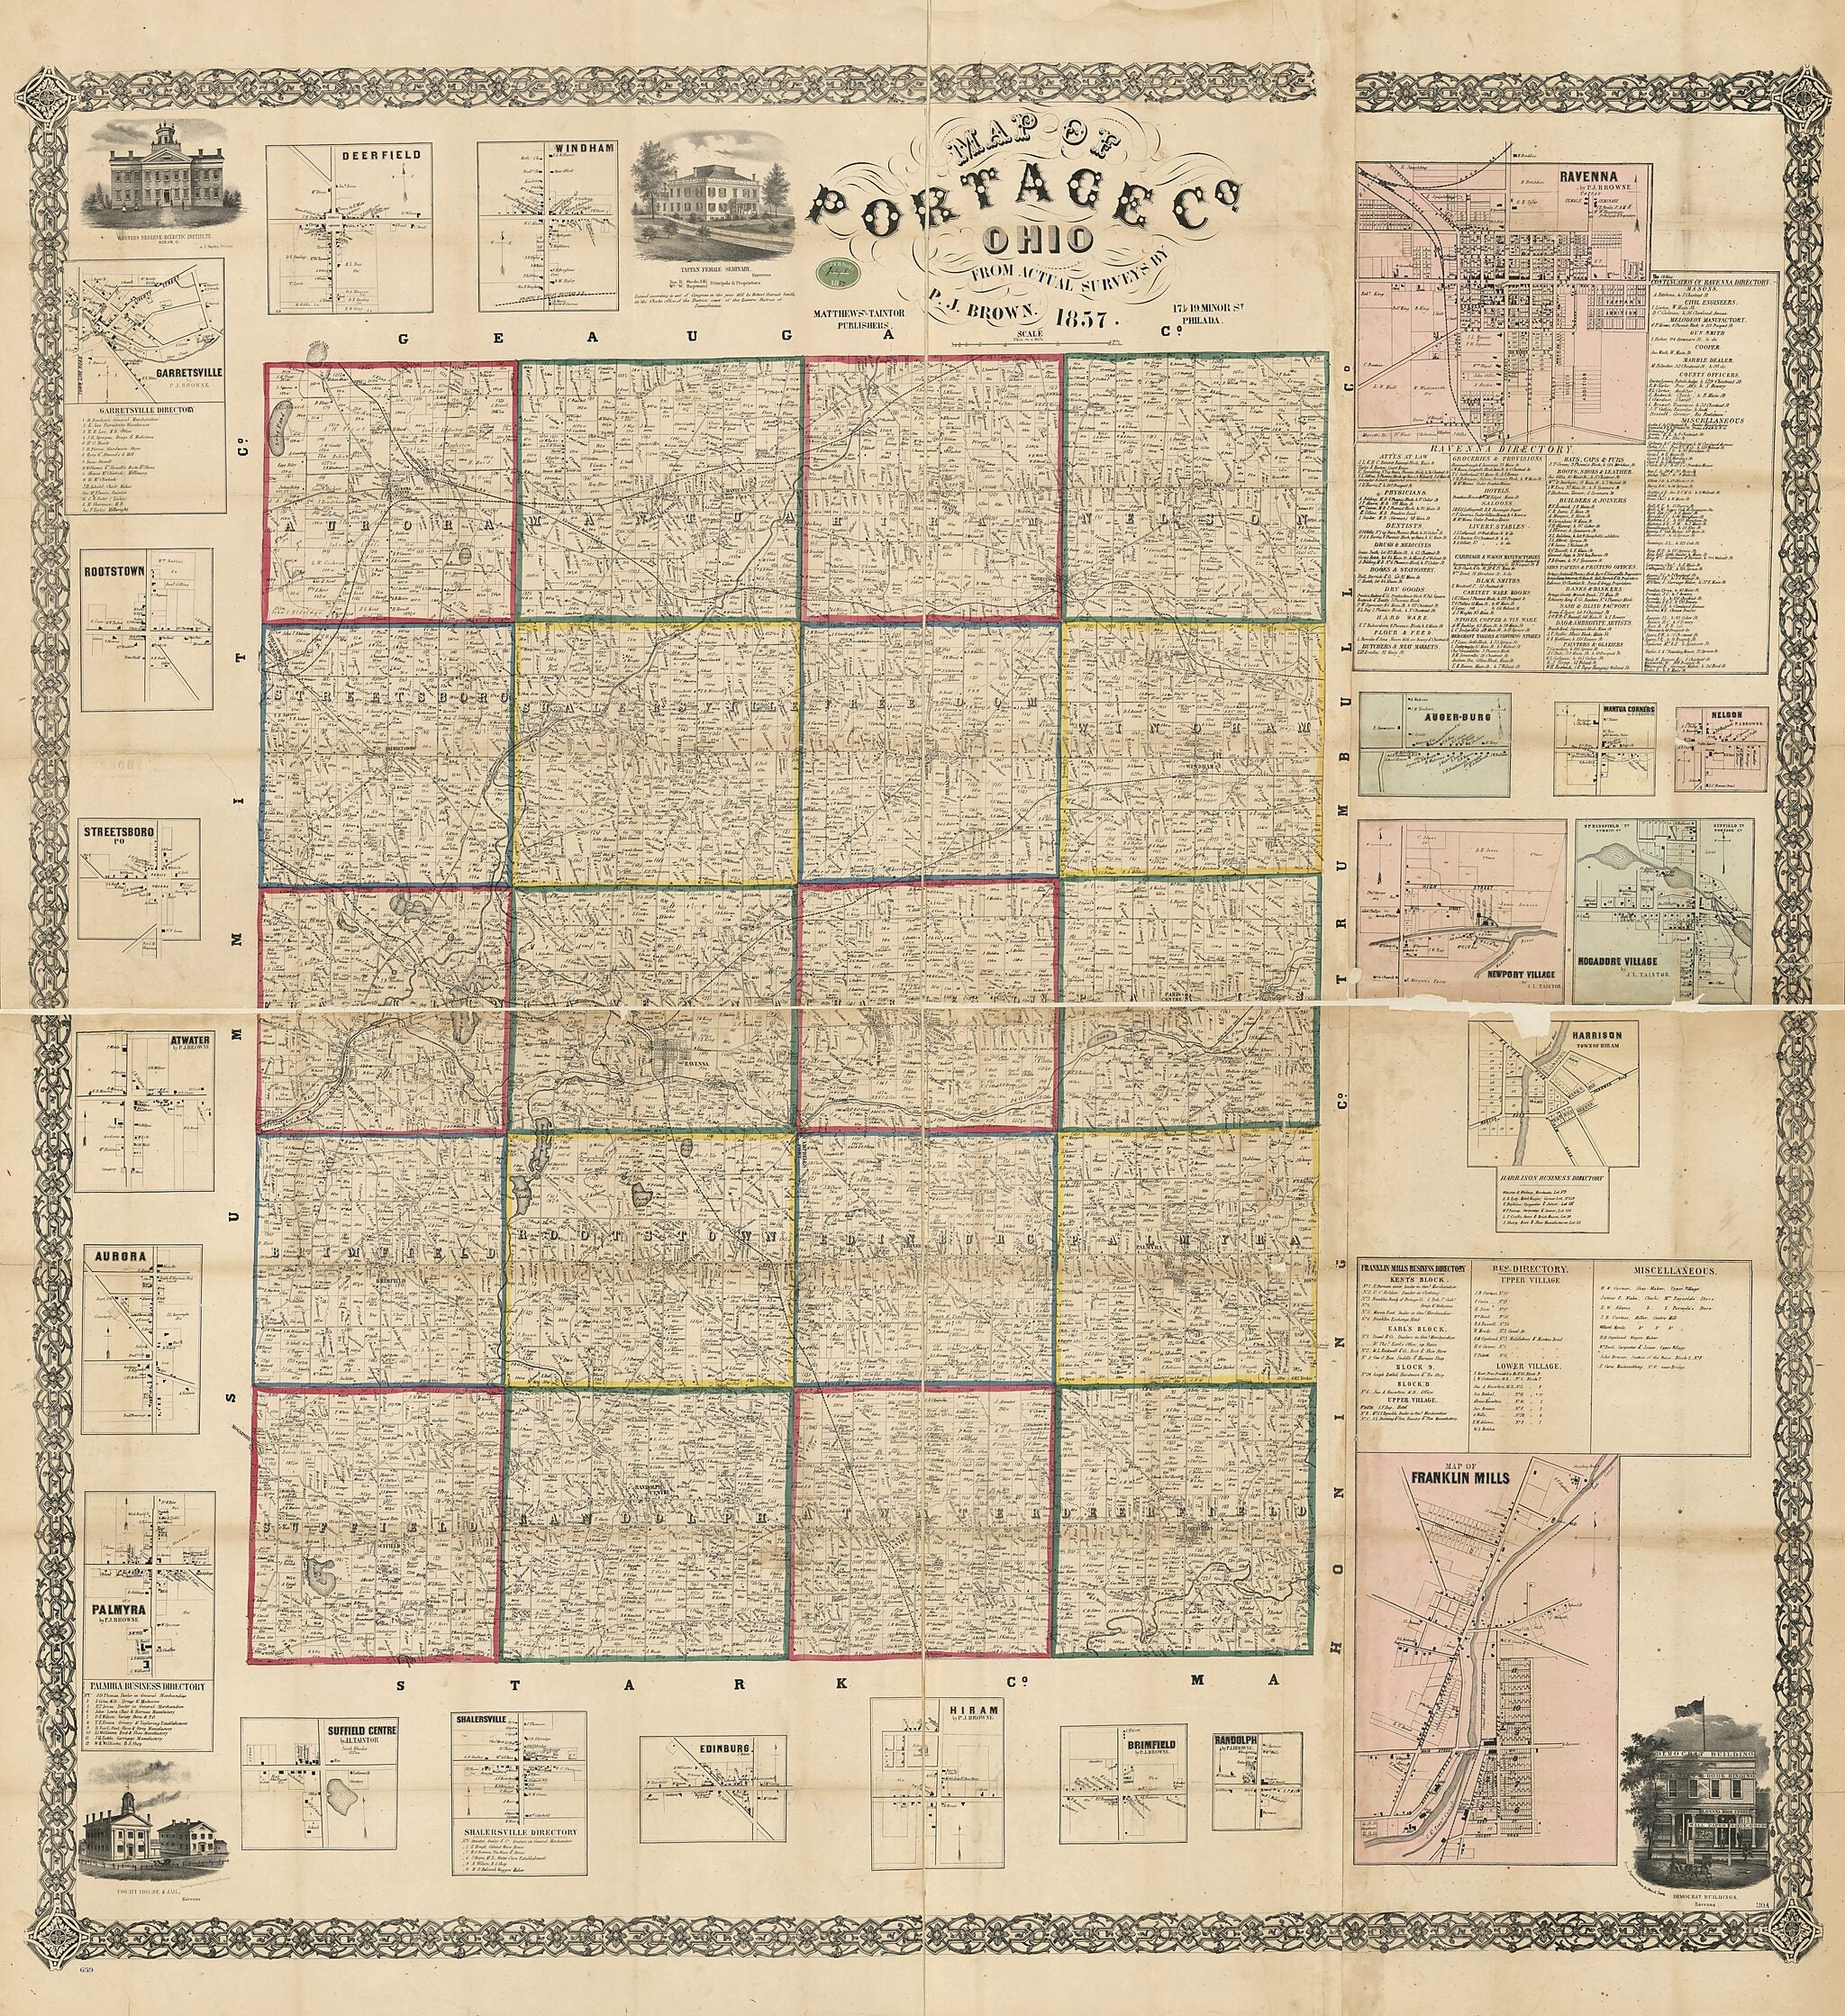 This old map of Map of Portage County, Ohio from 1857 was created by P. J. Brown in 1857